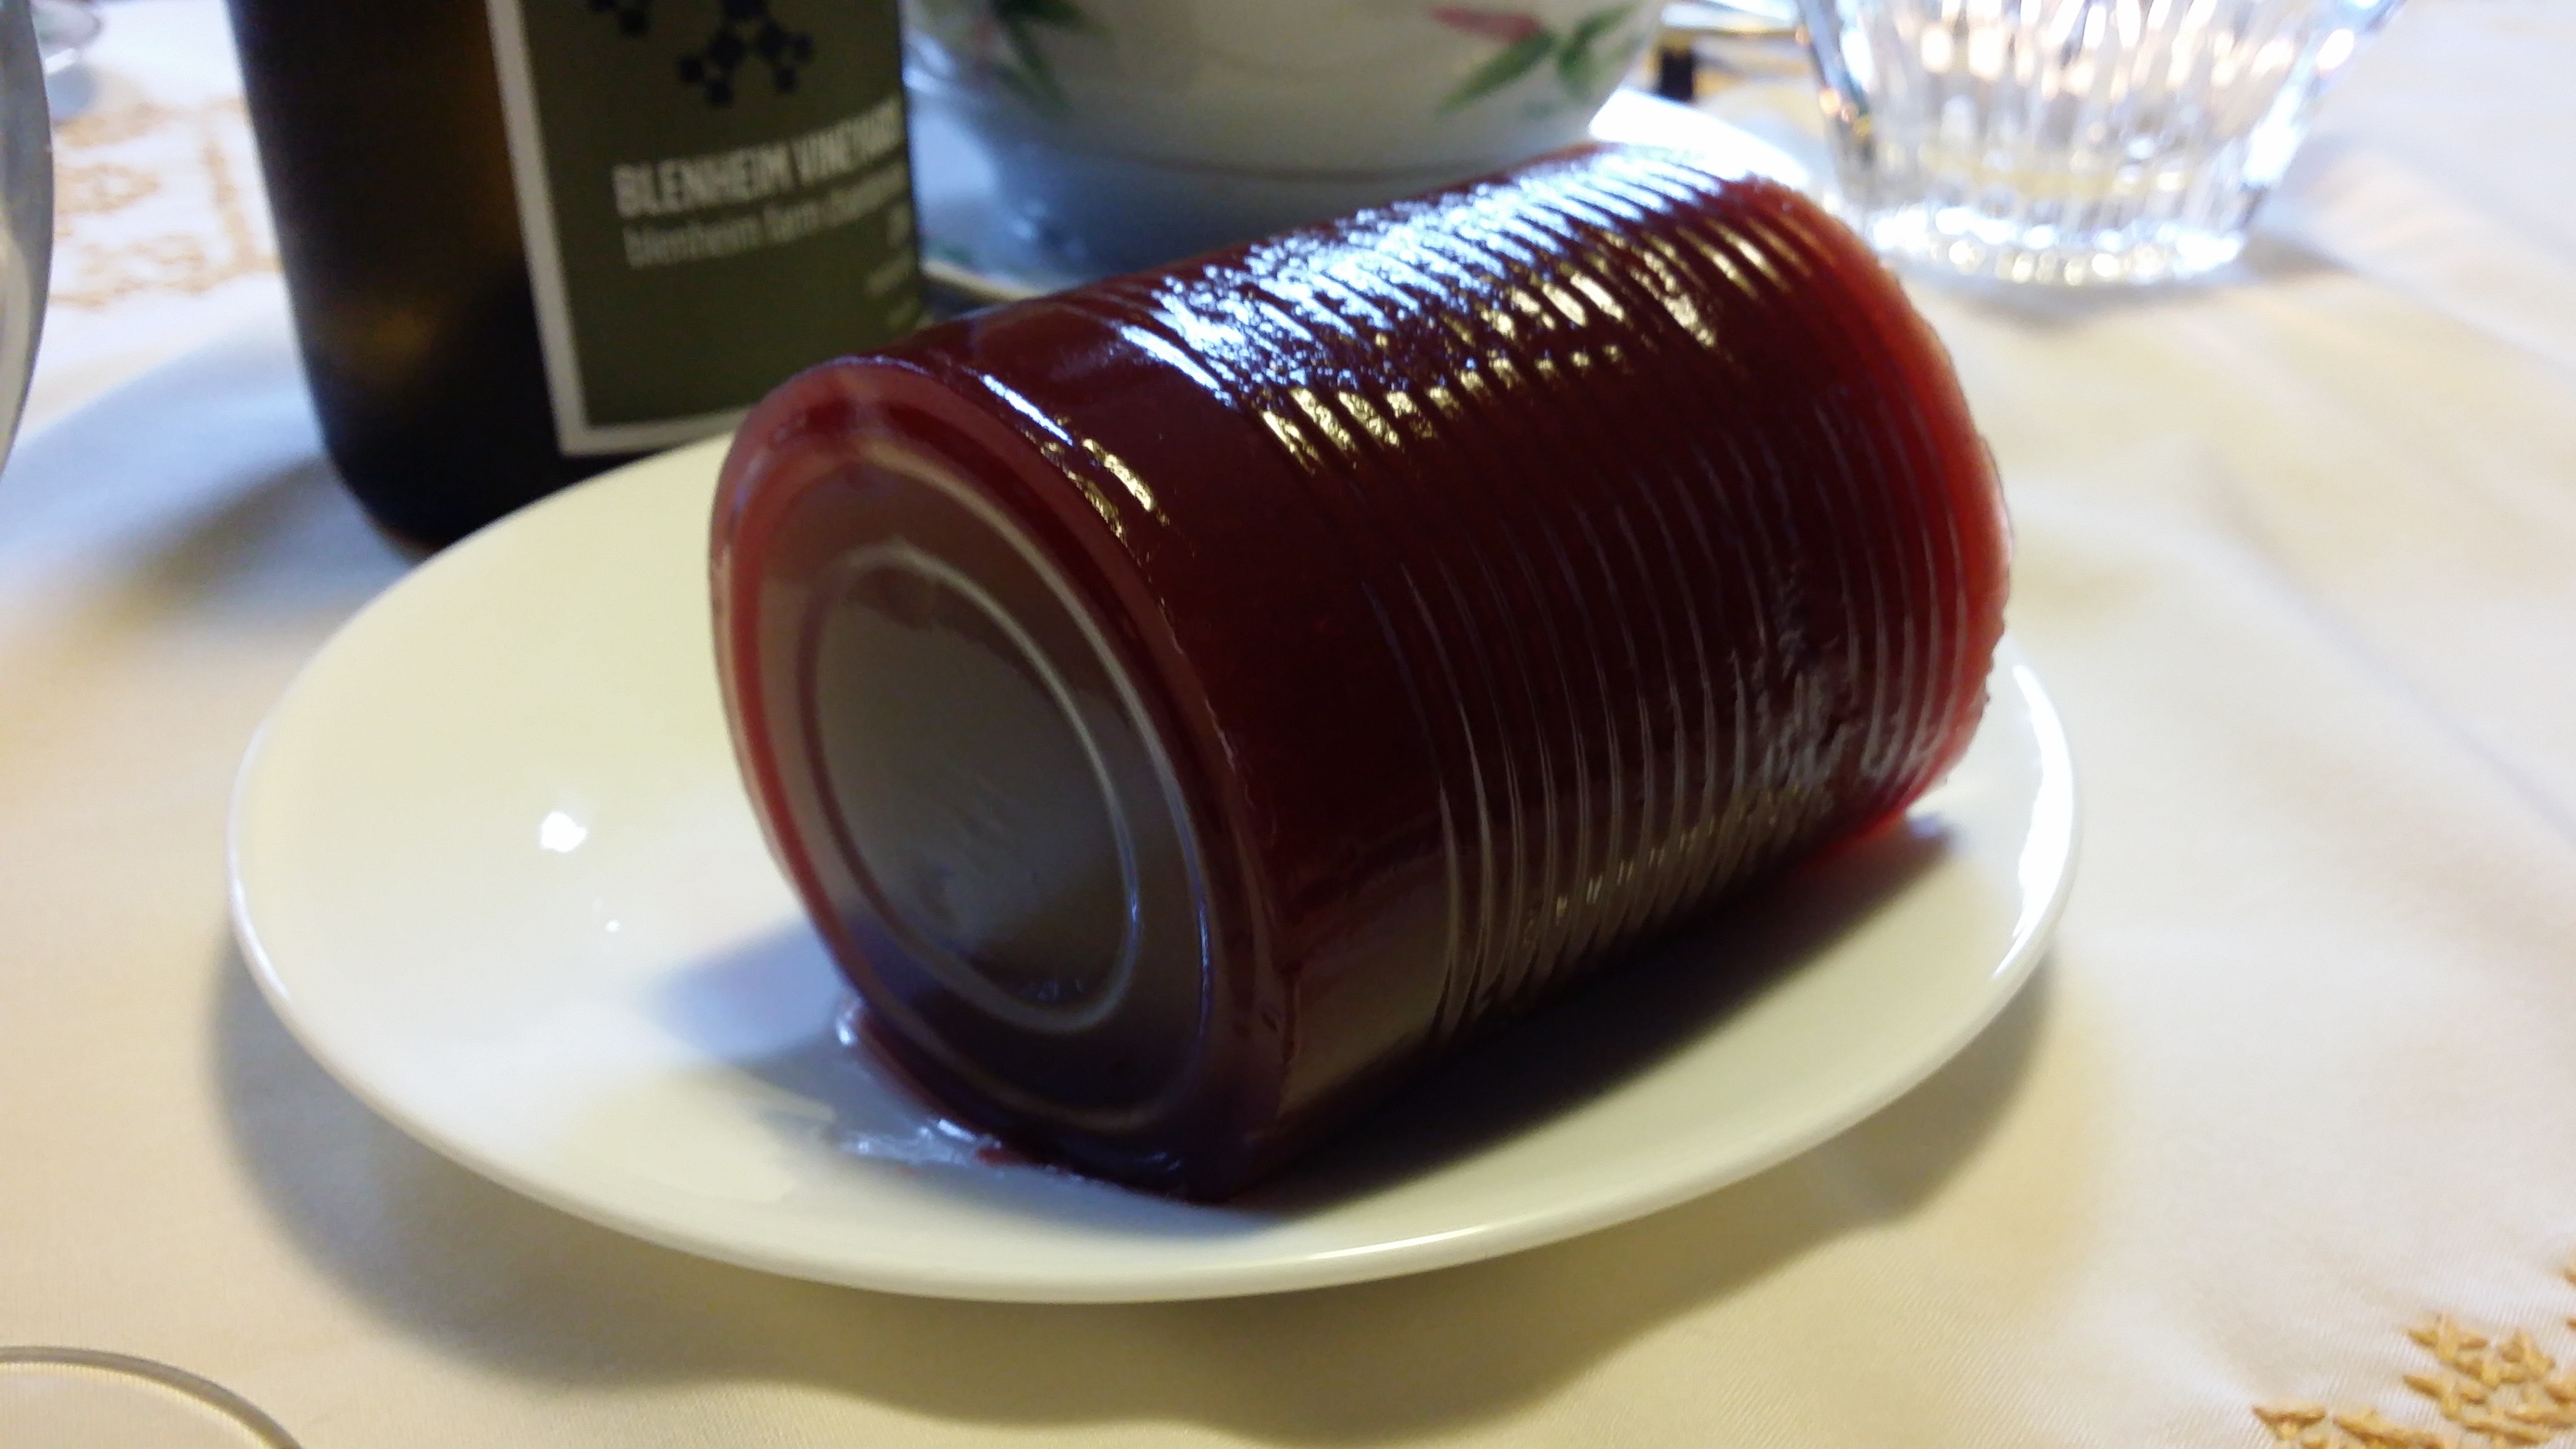 The Schumin Web » Cranberry sauce. From a can.